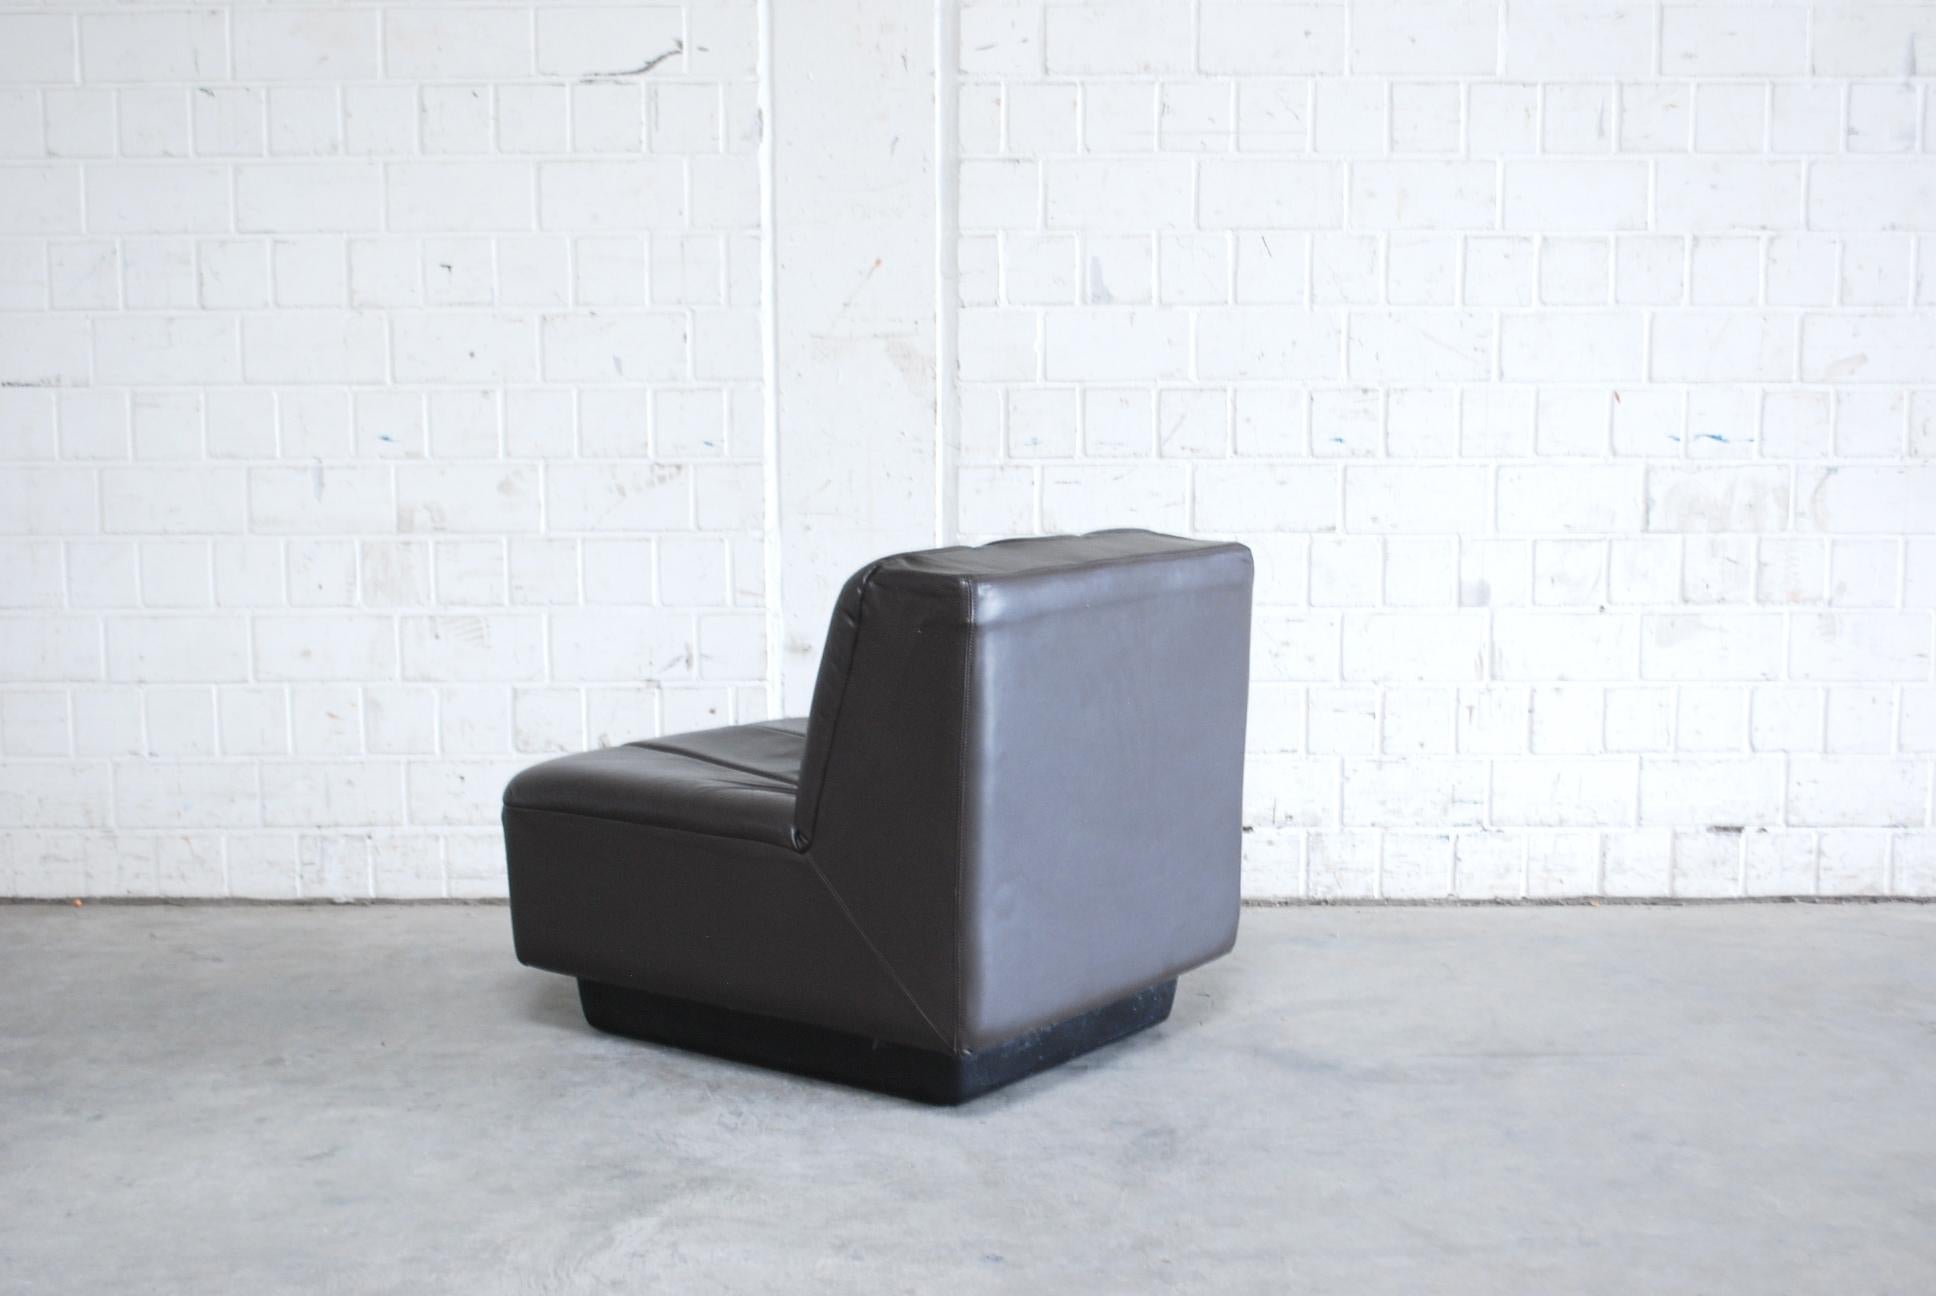 Late 20th Century Vintage 1970s Design German 2x Modul Brown Leather Chair